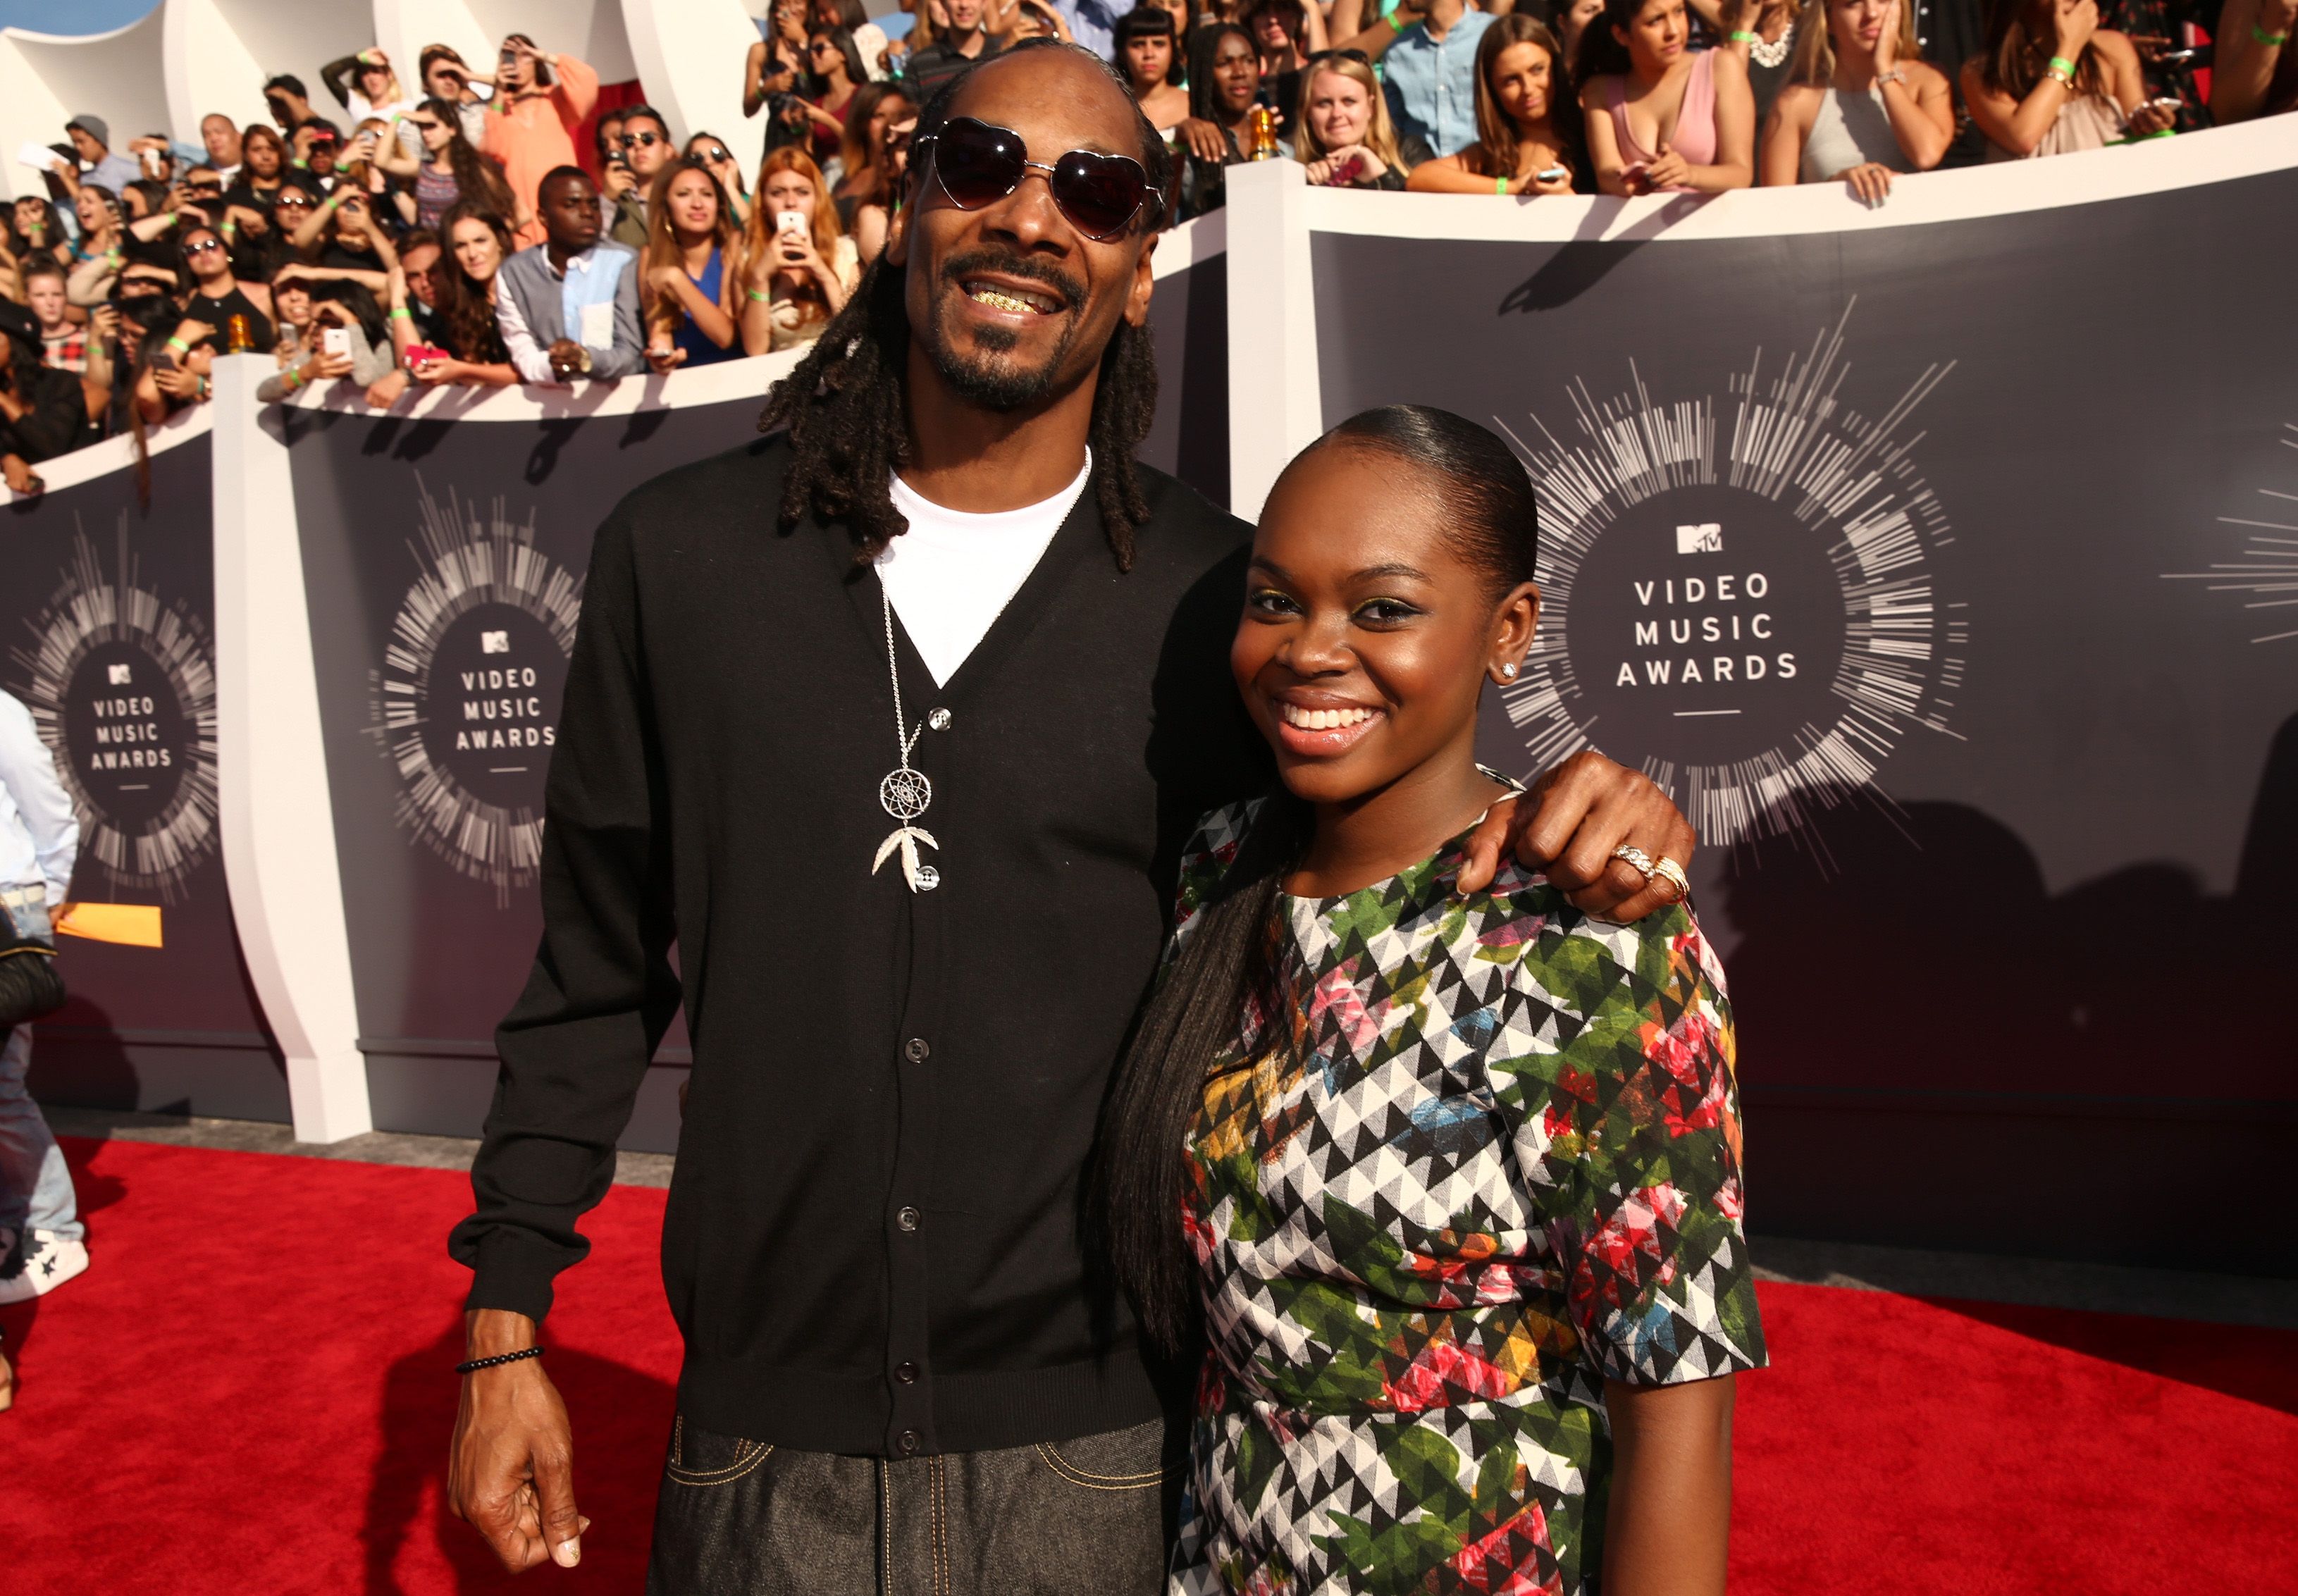 Recording artist Snoop Dogg and Cori Broadus at the 2014 MTV Video Music Awards at The Forum on August 24, 2014 | Photo: Getty Images